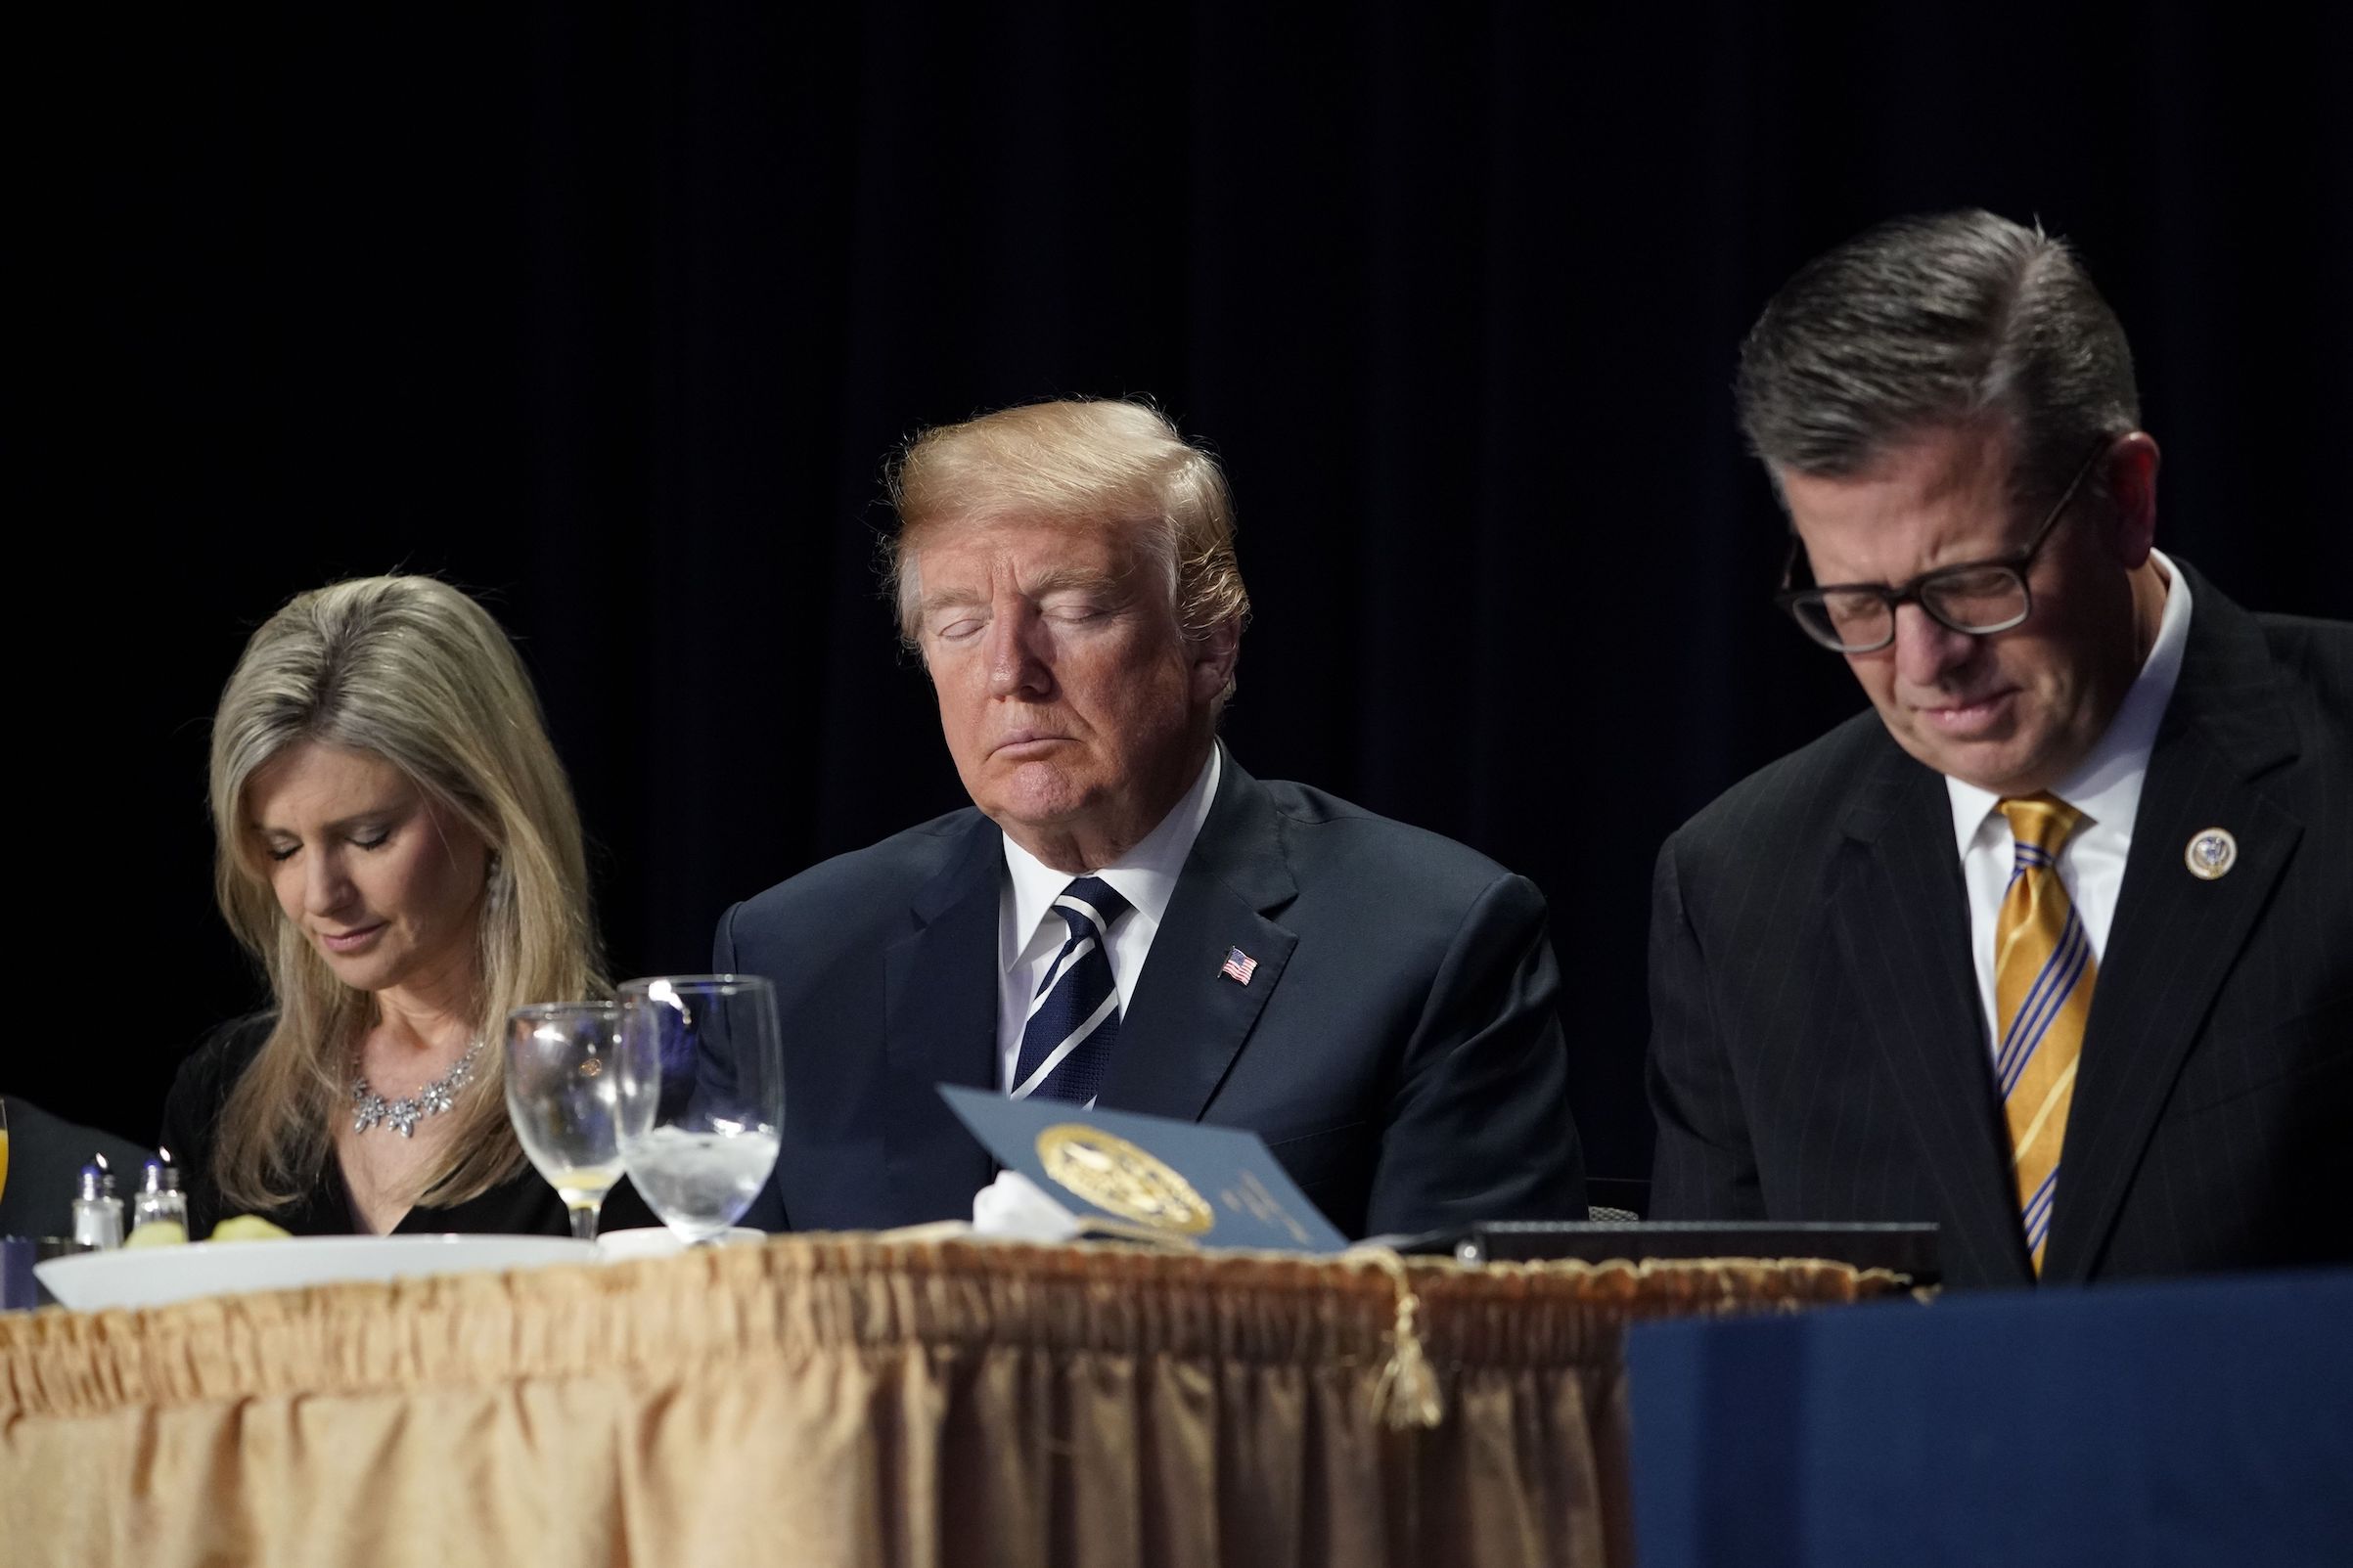 U.S. President Donald Trump (C) attends the National Prayer Breakfast at a hotel in Washington, D.C., on Feb. 8, 2018. (Mandel Ngan—AFP/Getty Images)